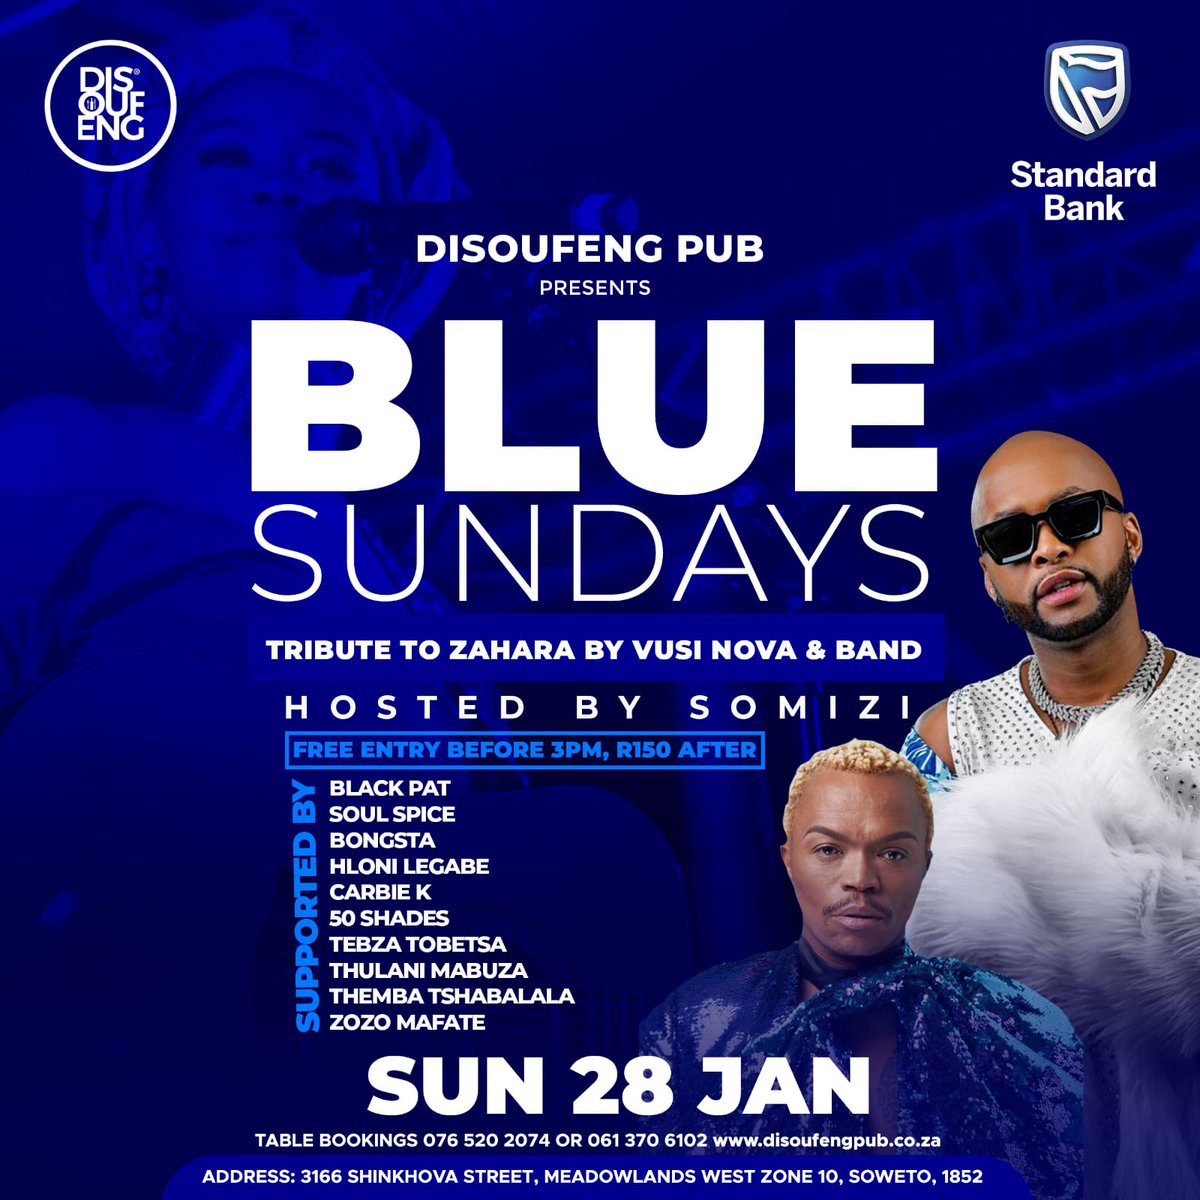 It's #BlueSundays happening @DISOUFENG_PUB this Sunday 28th Jan Issa awesome Sunday chillas feel . It's Tribute to sis @ZaharaSA by @vusinova_ plus band hosted by @somizi let's pitch in numbers 😇❤️💥♥️🎉🇿🇦